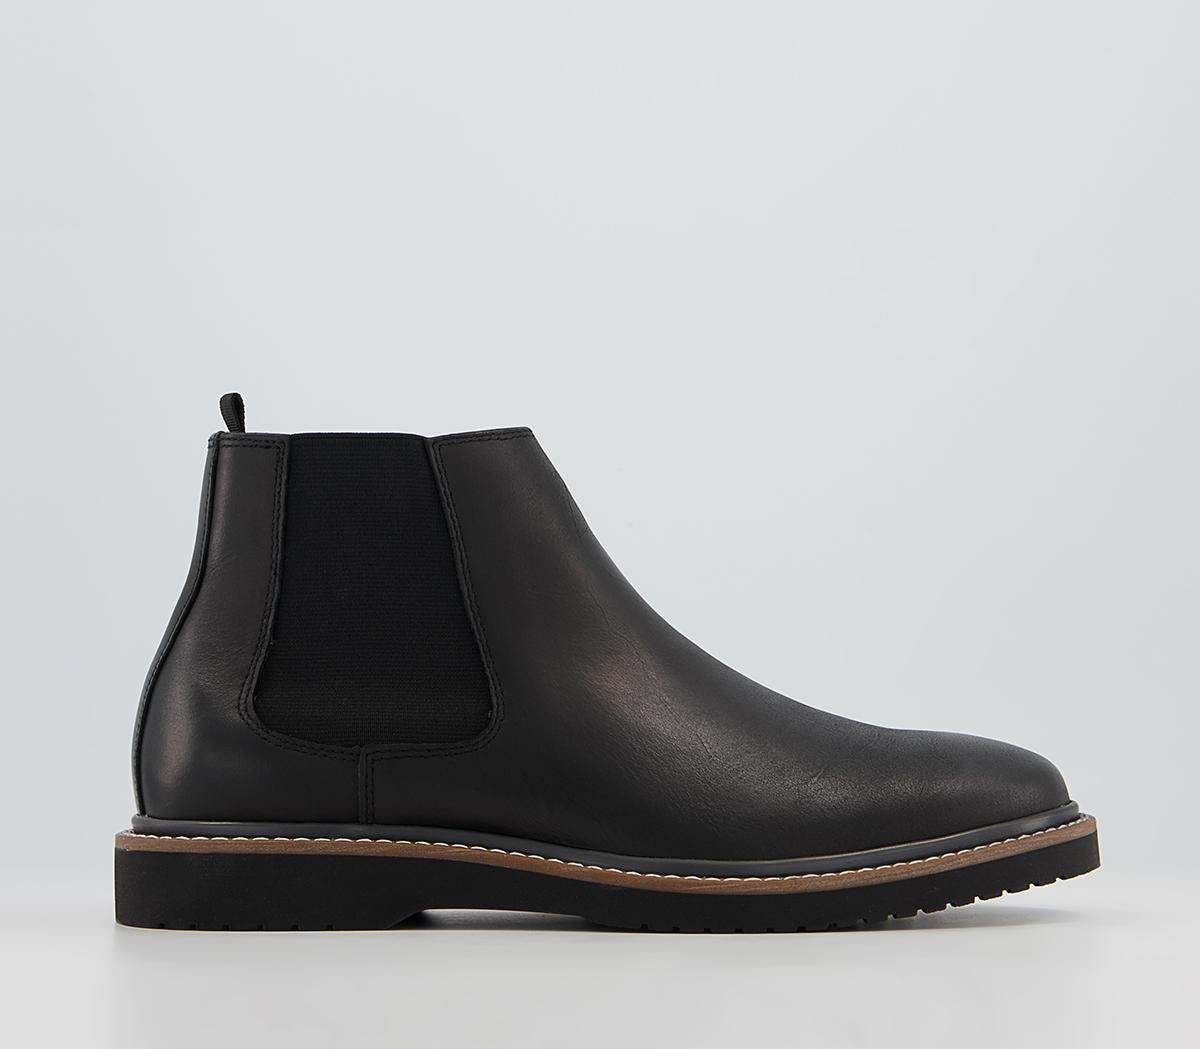 OFFICE Bolton Wedge Chelsea Boots Black Leather - Men’s Boots